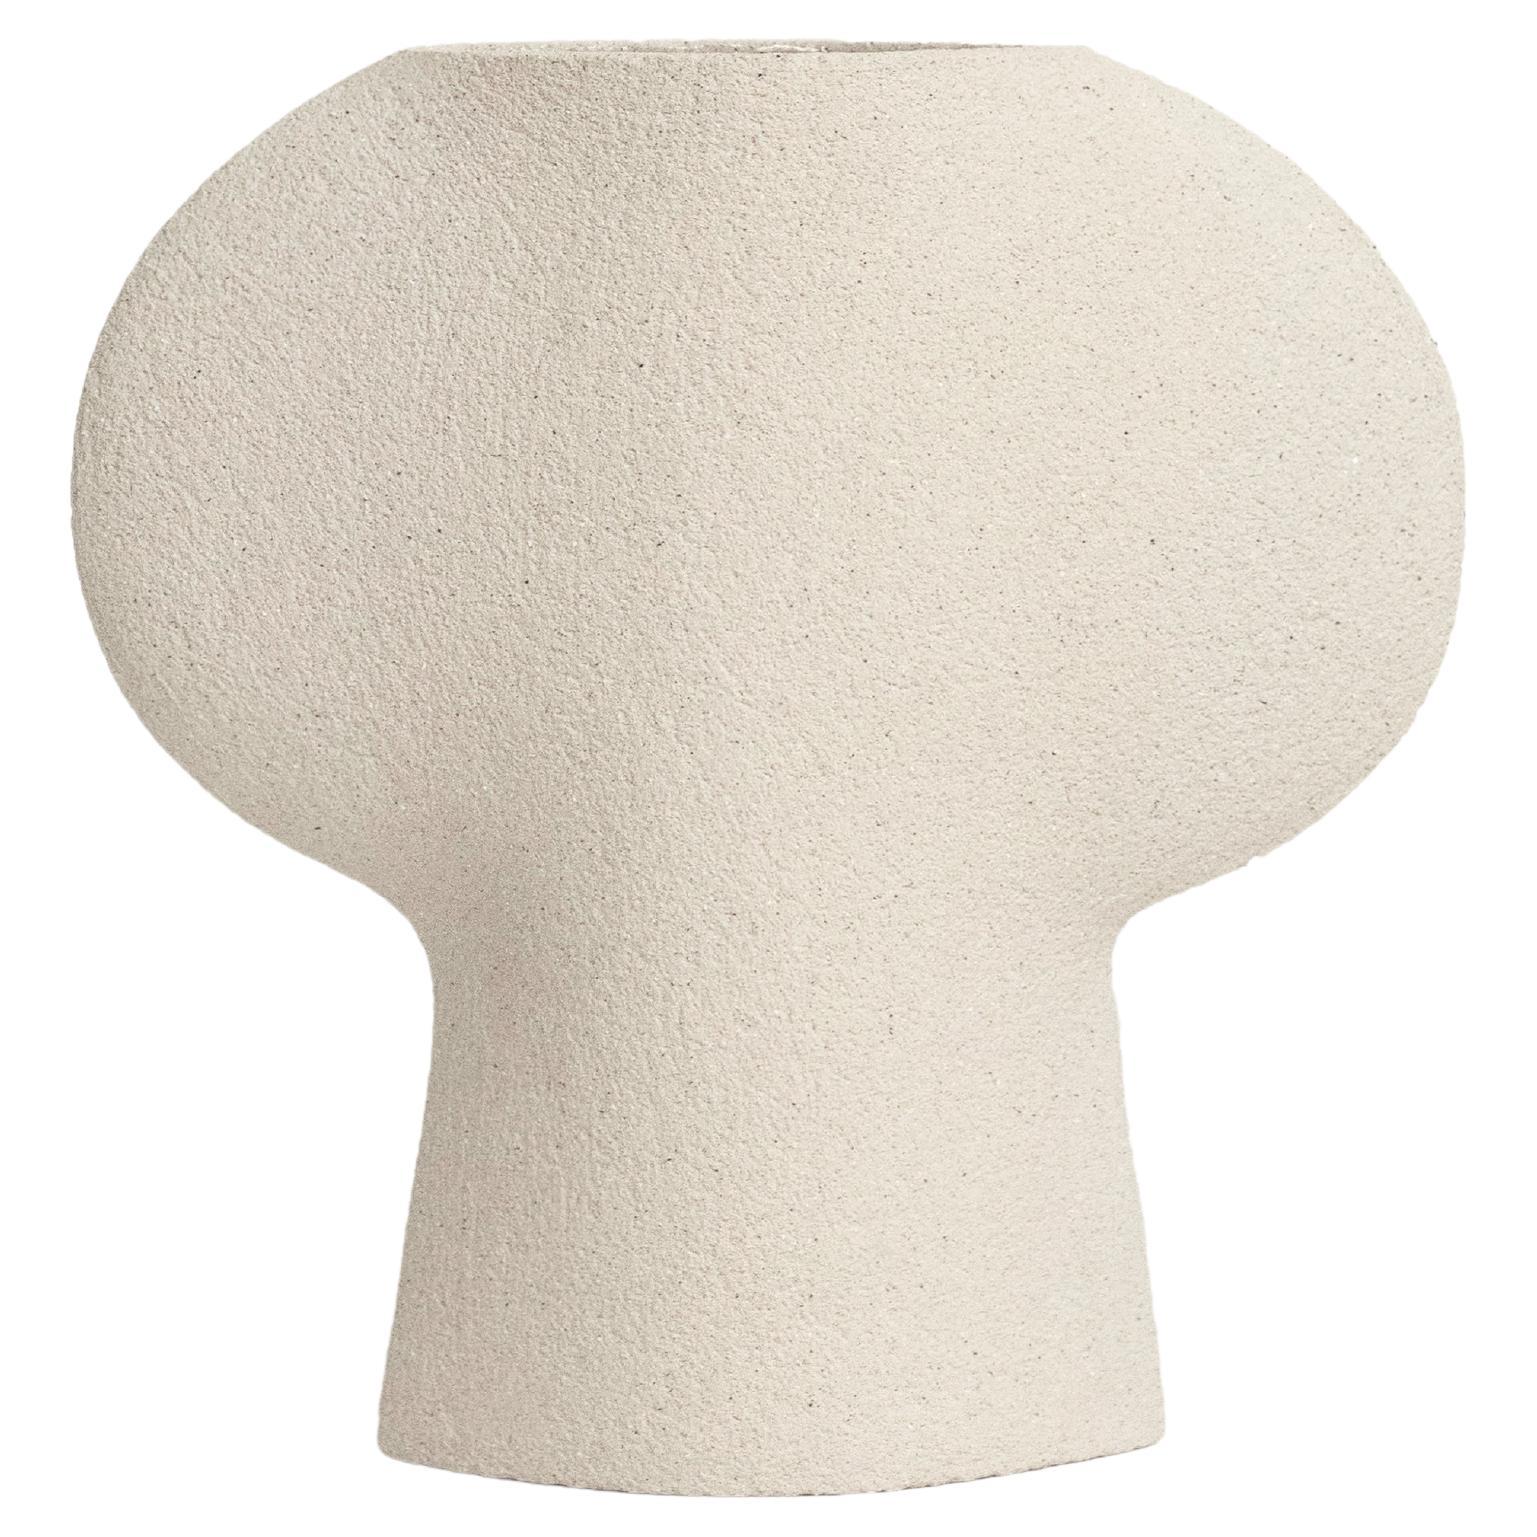 21st Century Clover Vase in White Ceramic, Hand-Crafted in France